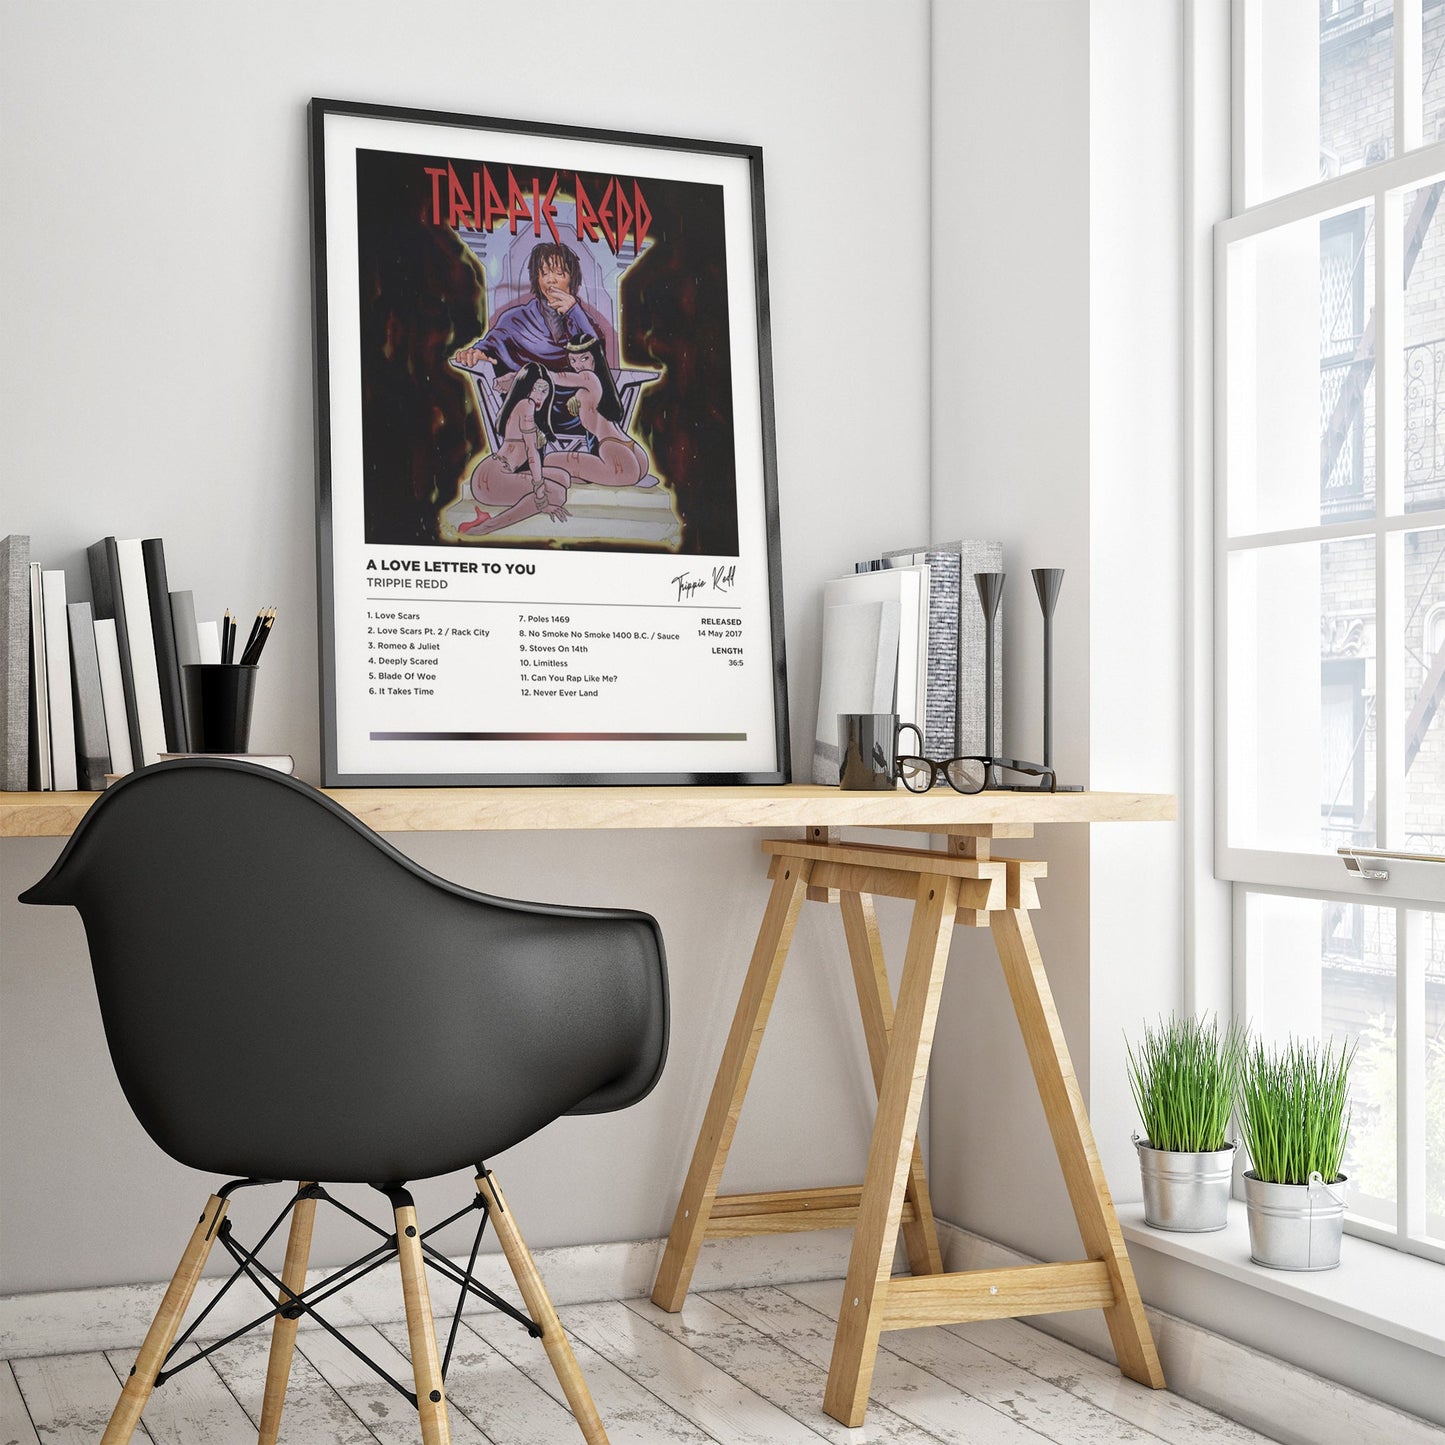 Trippie Redd - A Love Letter To You Framed Poster Print | Polaroid Style | Album Cover Artwork